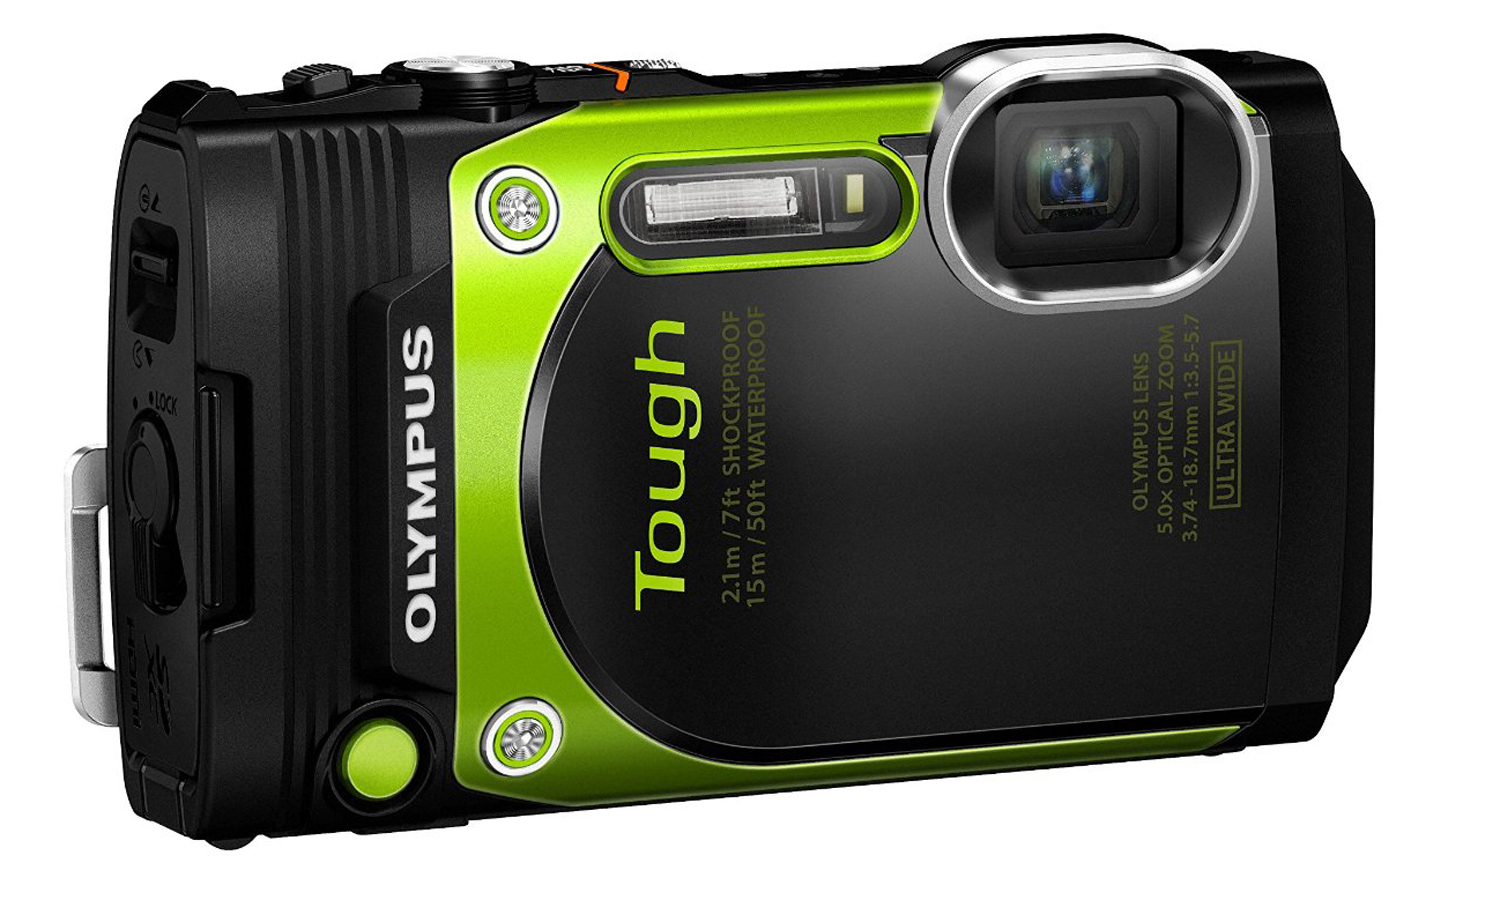 Olympus Stylus Tough TG-870 Review | Tom's Guide